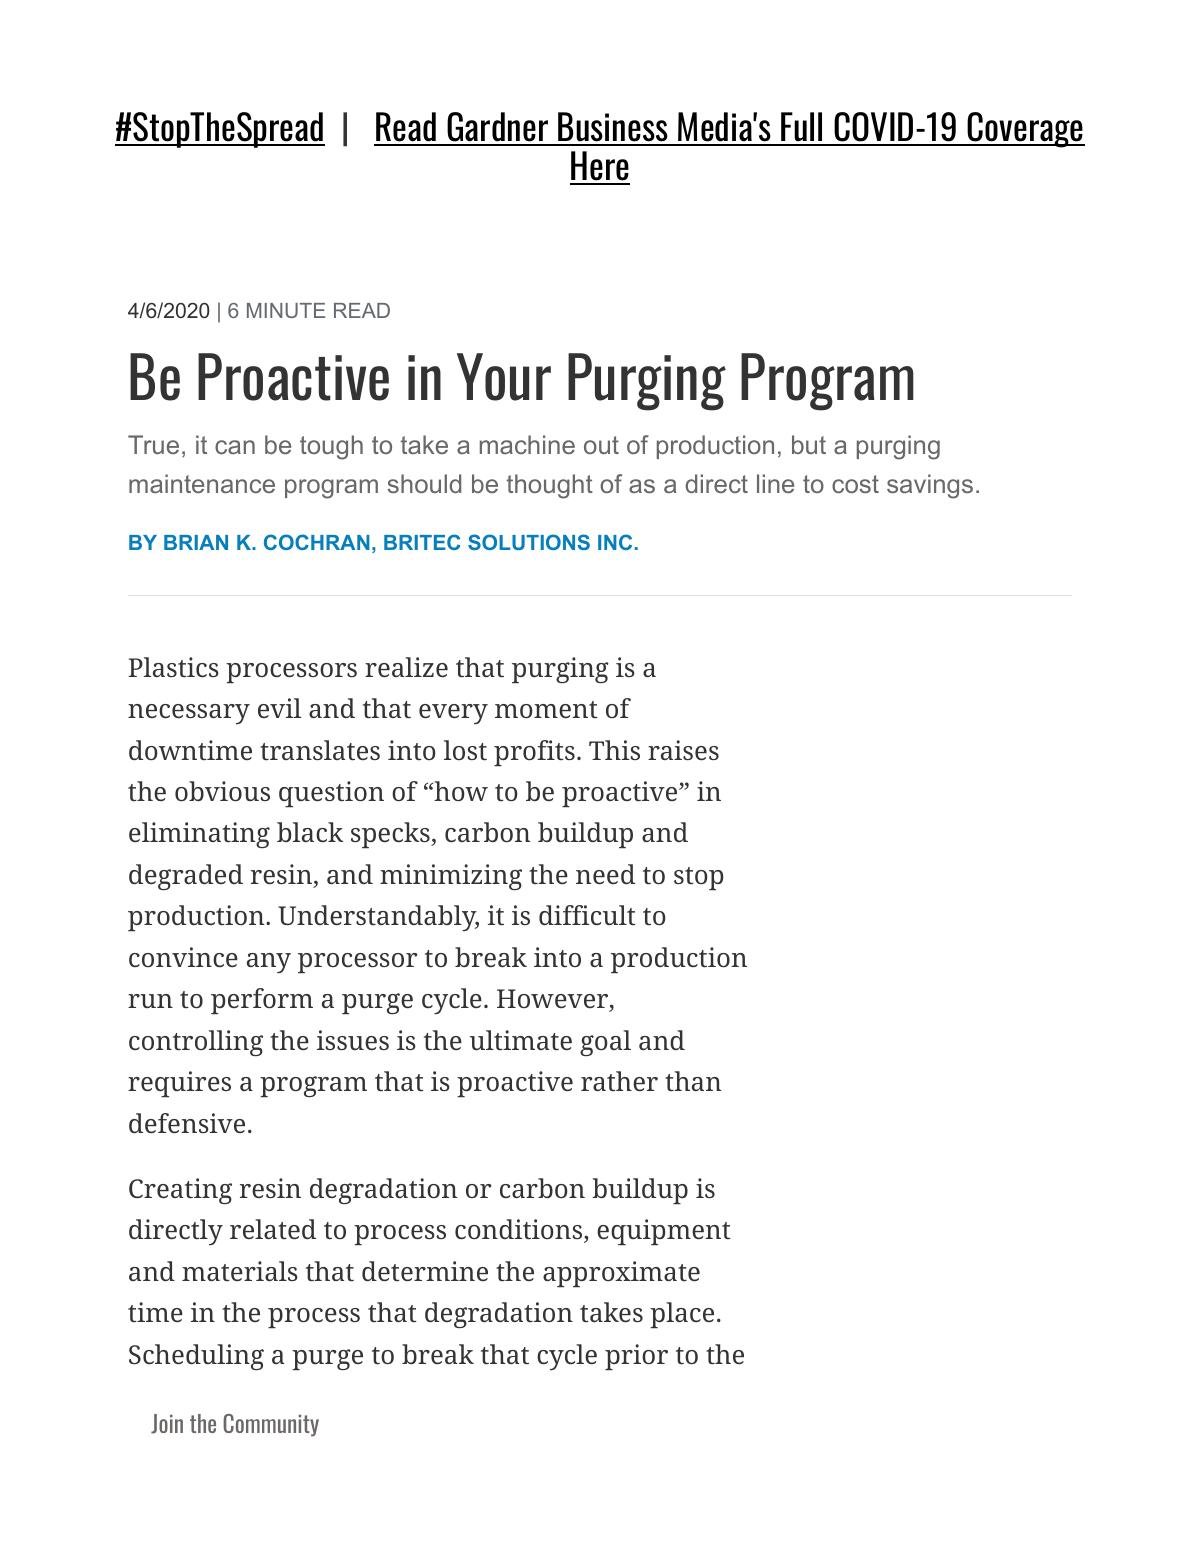 Be Proactive in Your Purging Program